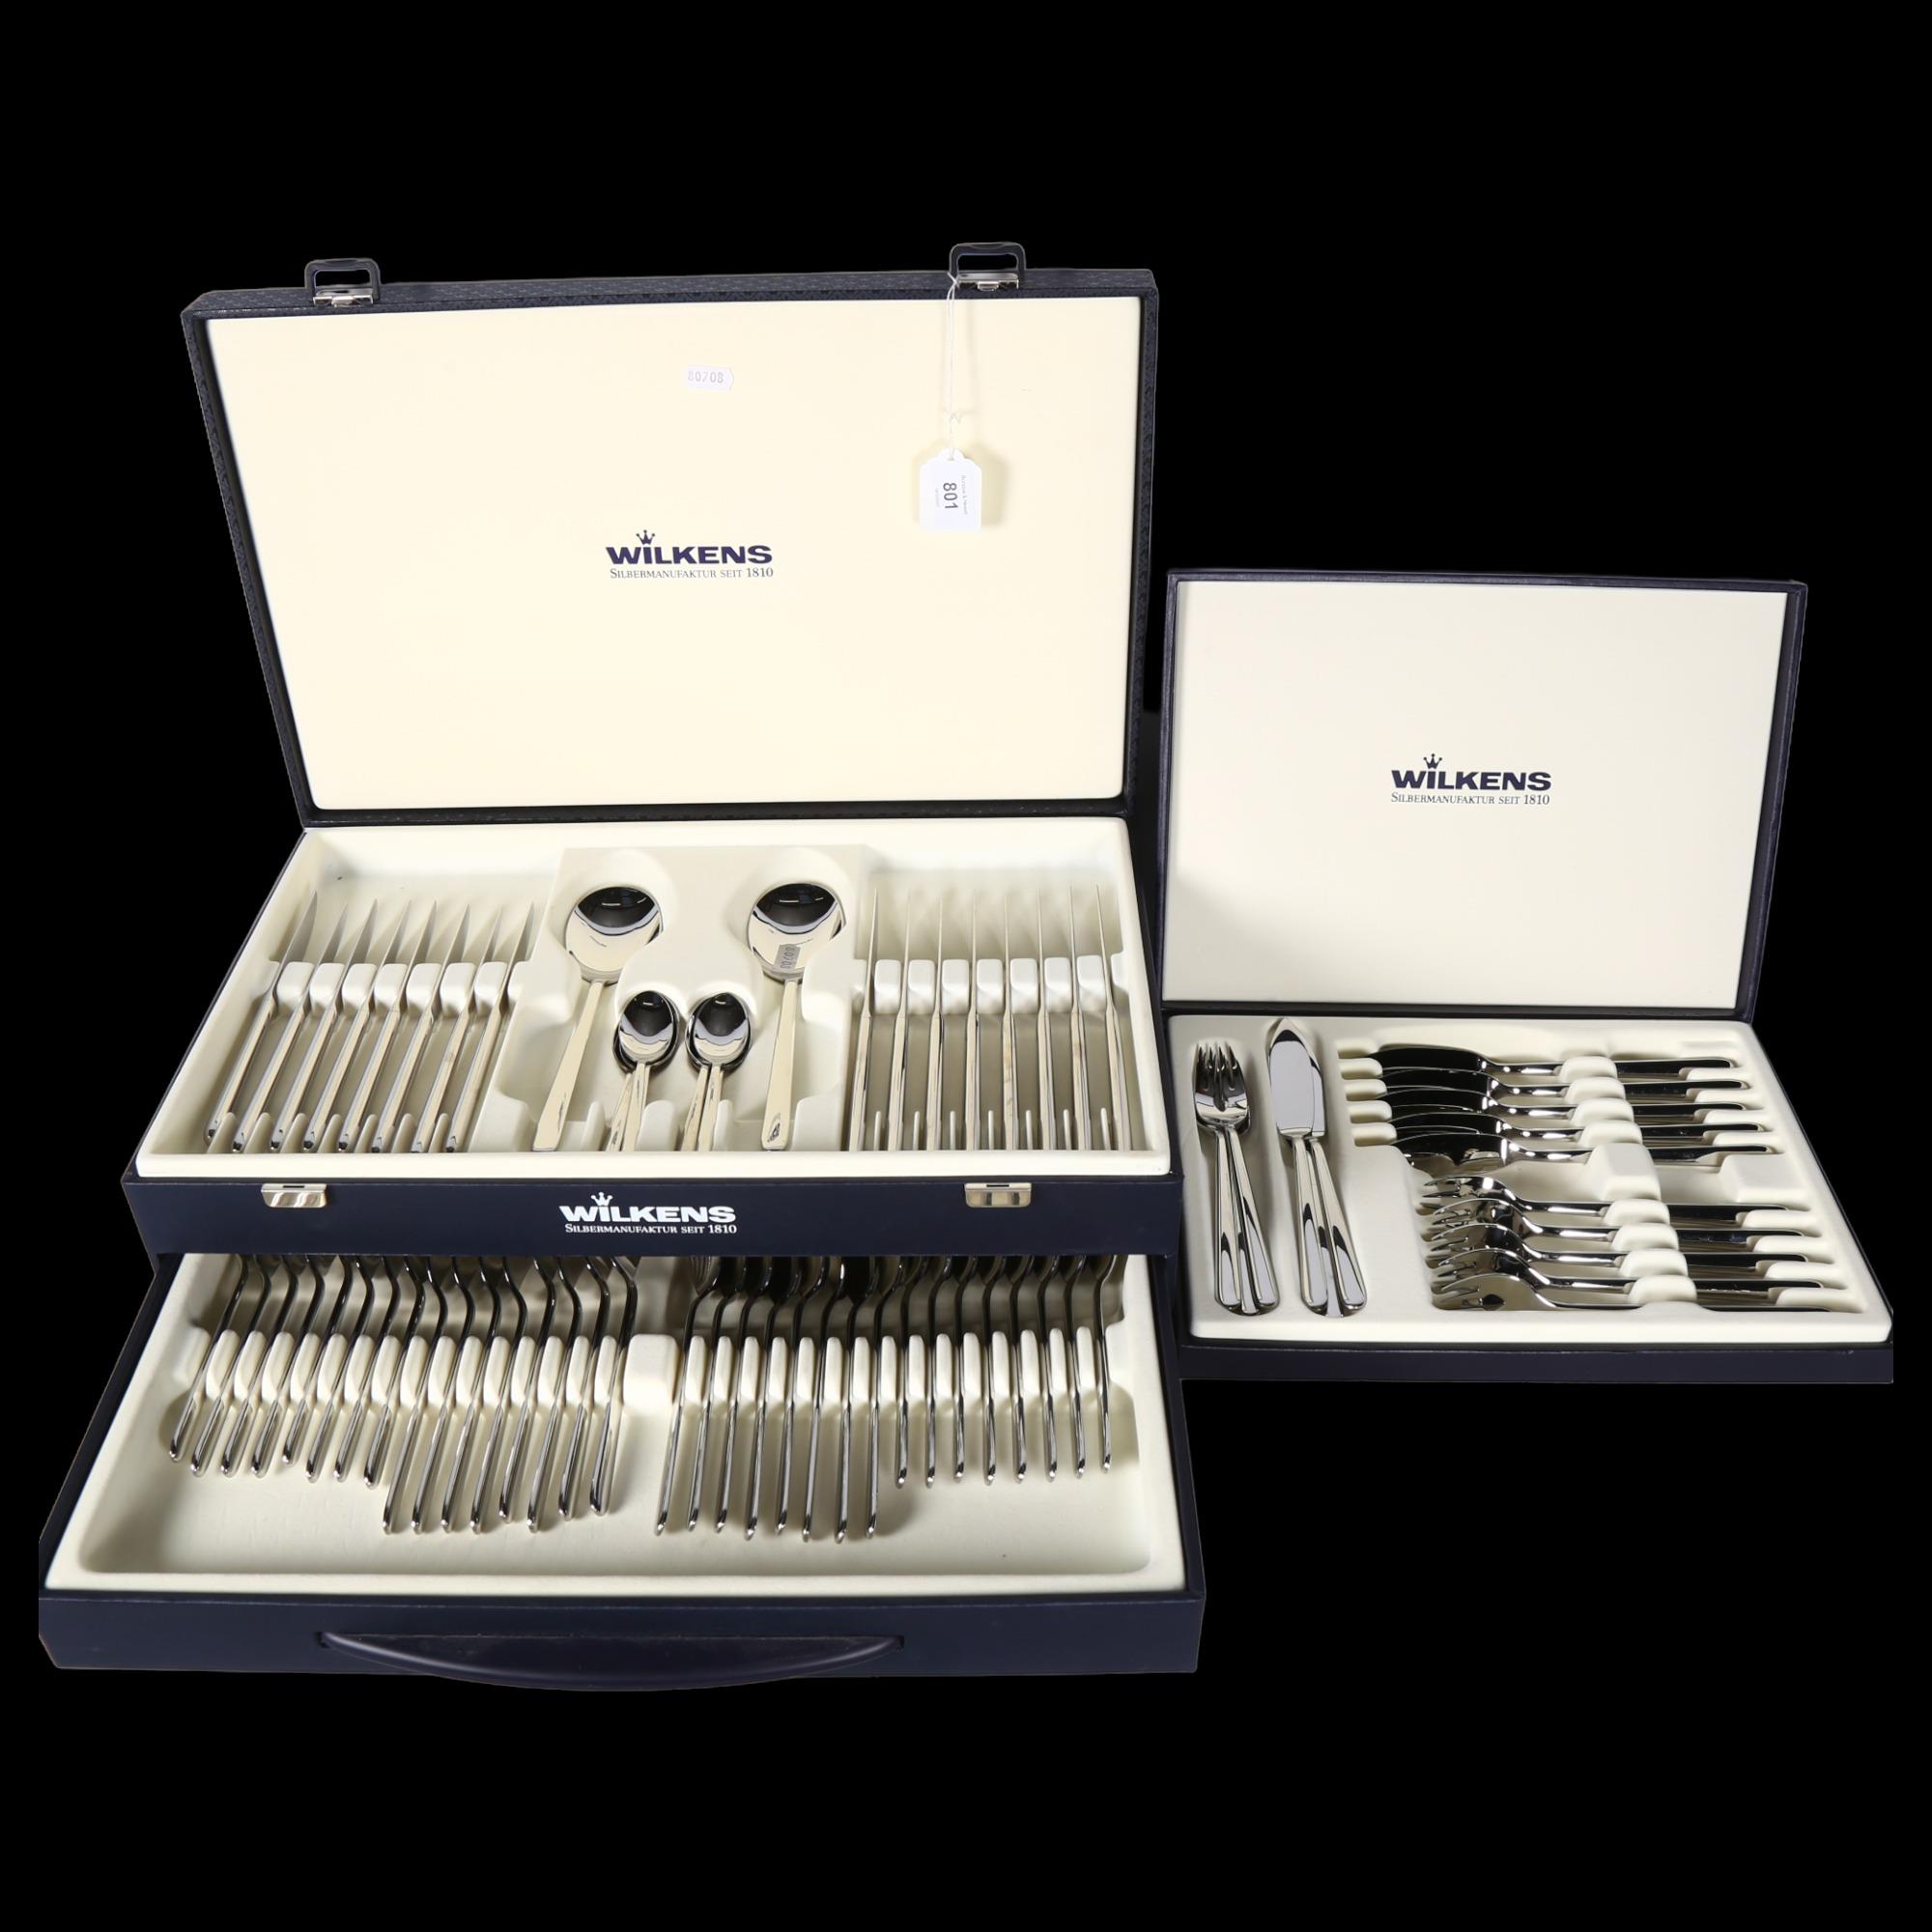 A Wilkens, Silbermanufaktur Seit1810 stainless steel canteen of cutlery for 8 people, in original